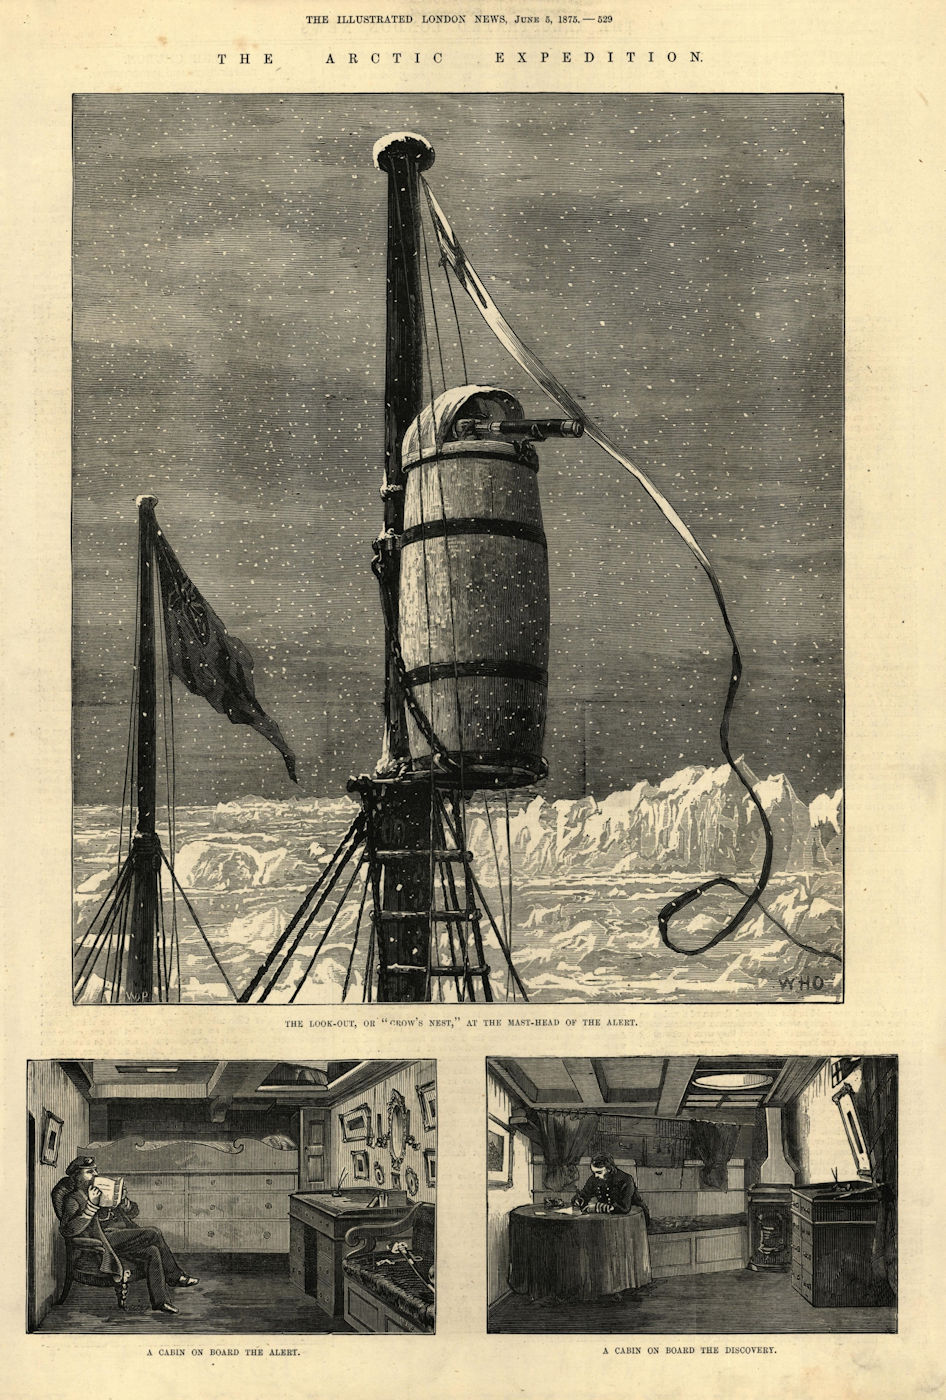 The Arctic Expedition: The Alert's Crow's nest. The Discovery's cabins 1875